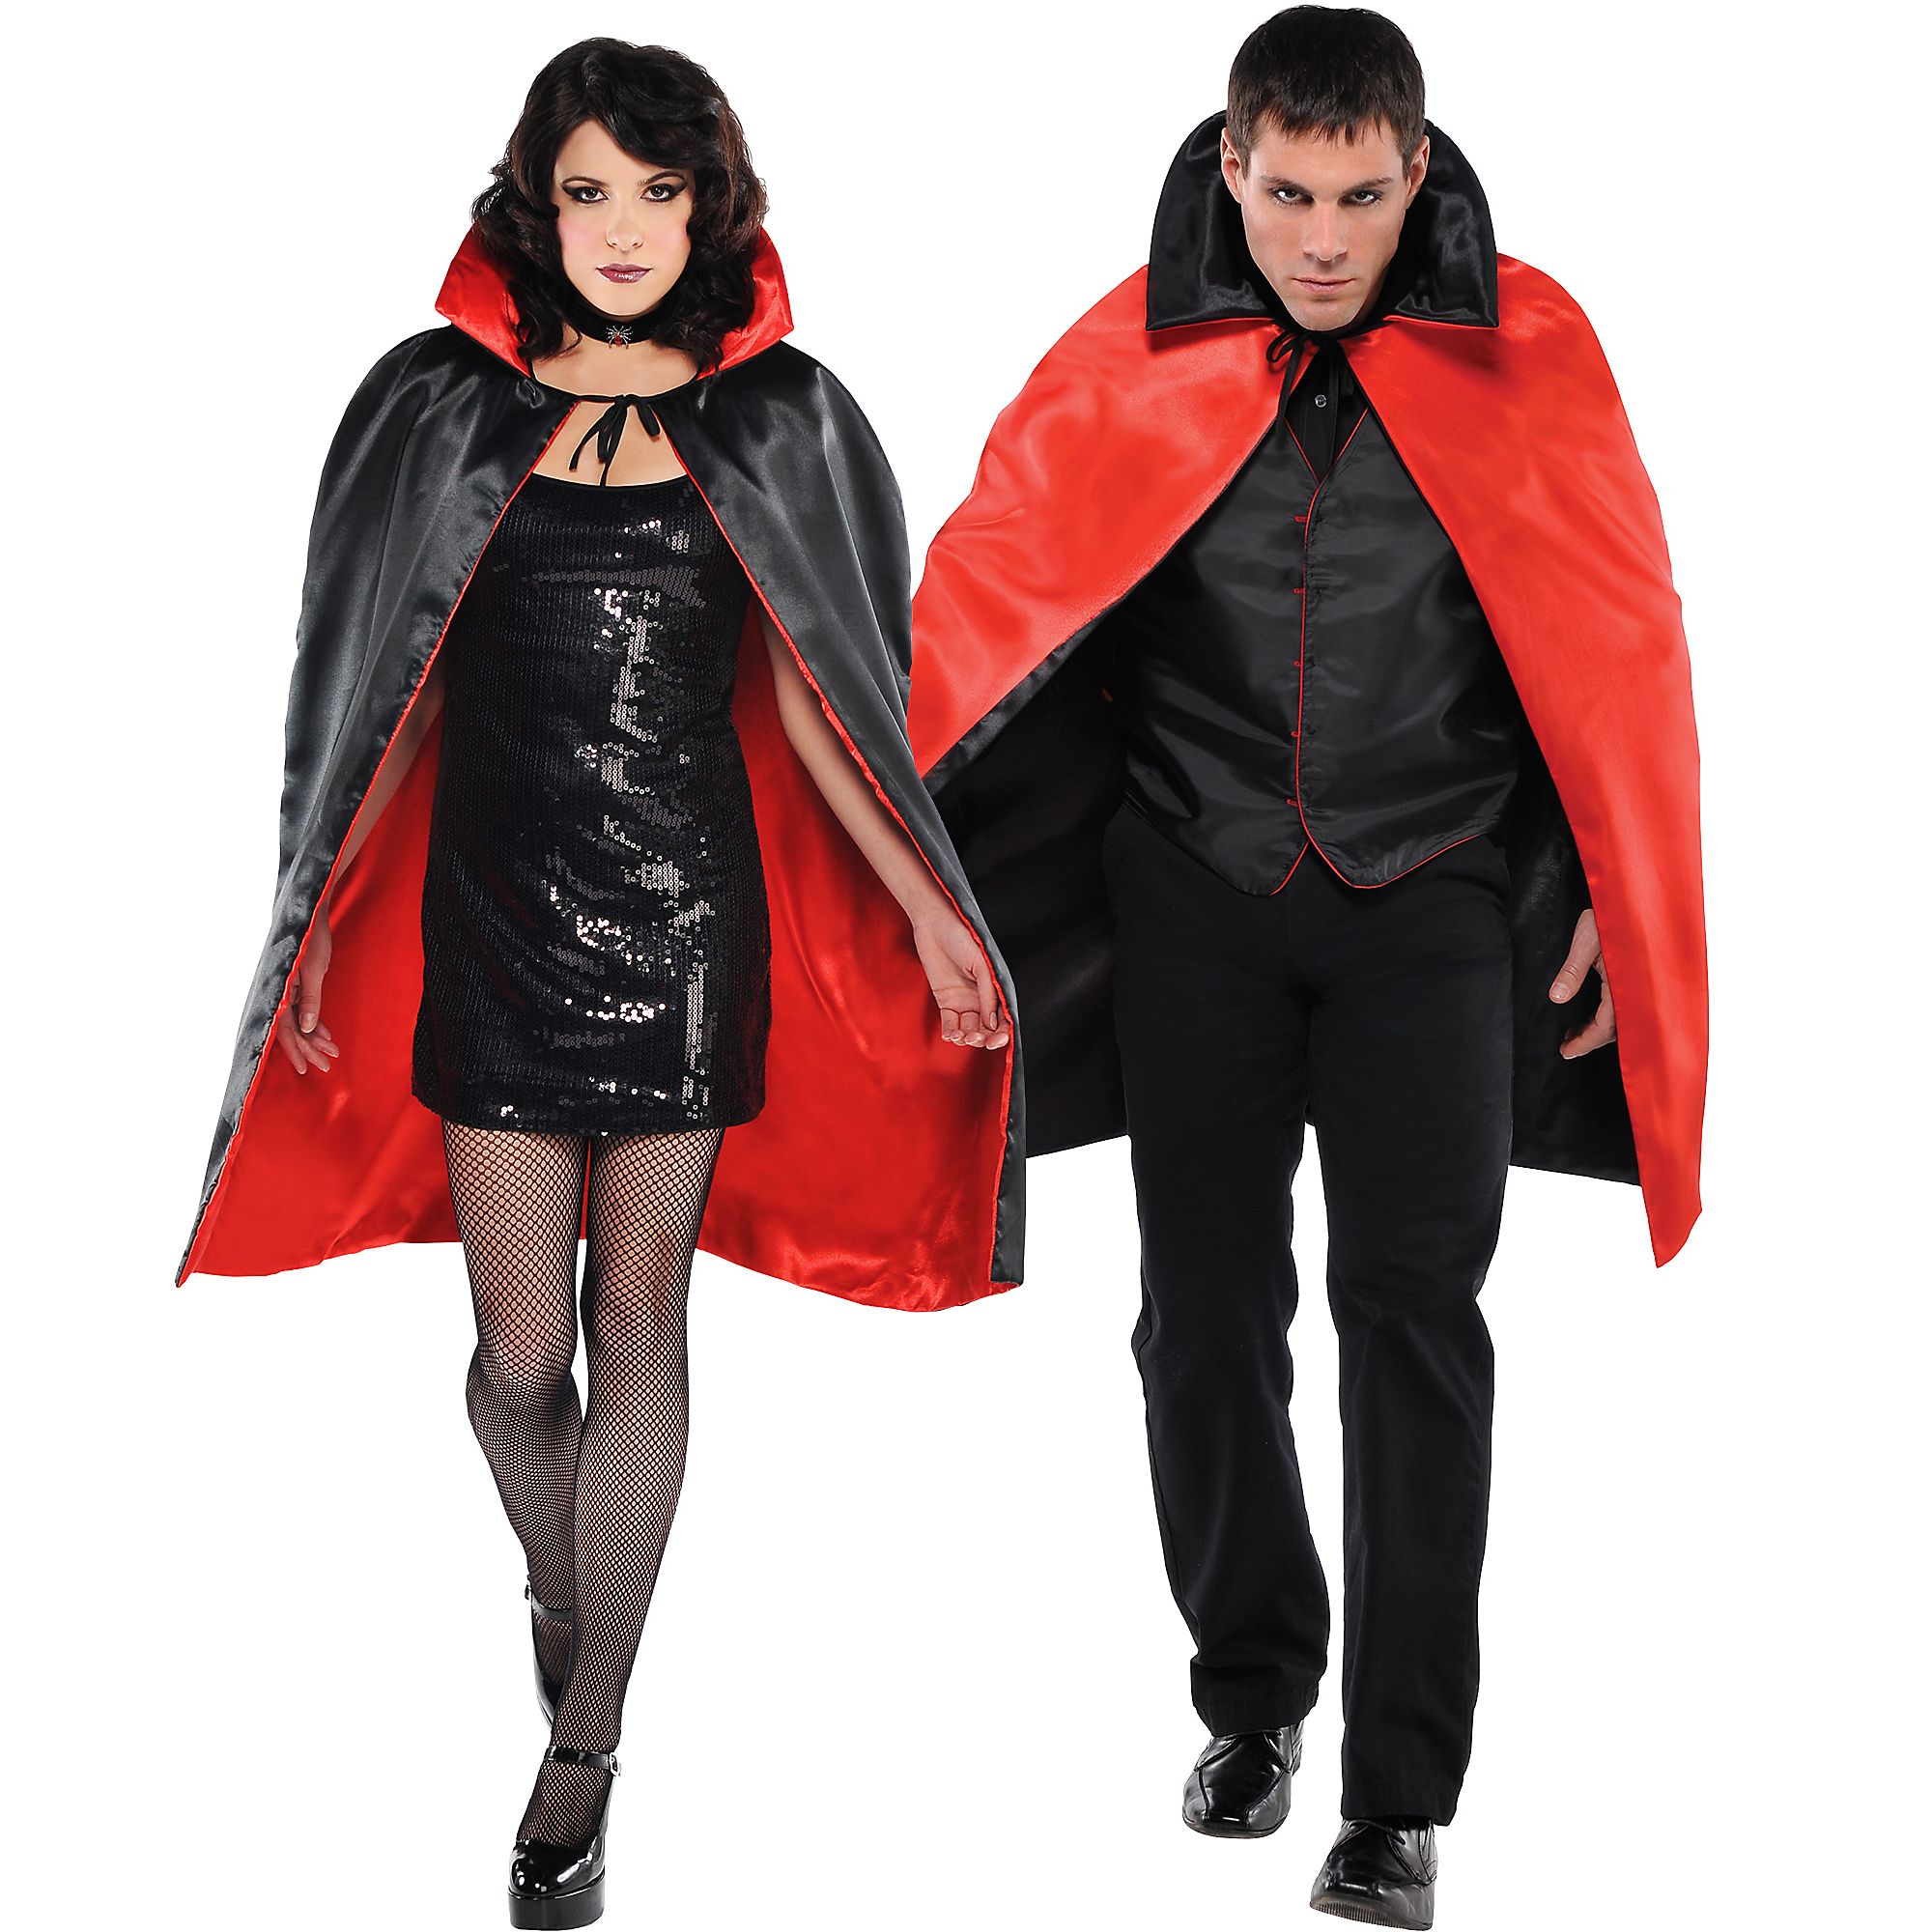 Black & Red Reversible Vampire Cape Halloween Costume for Adults, One ...